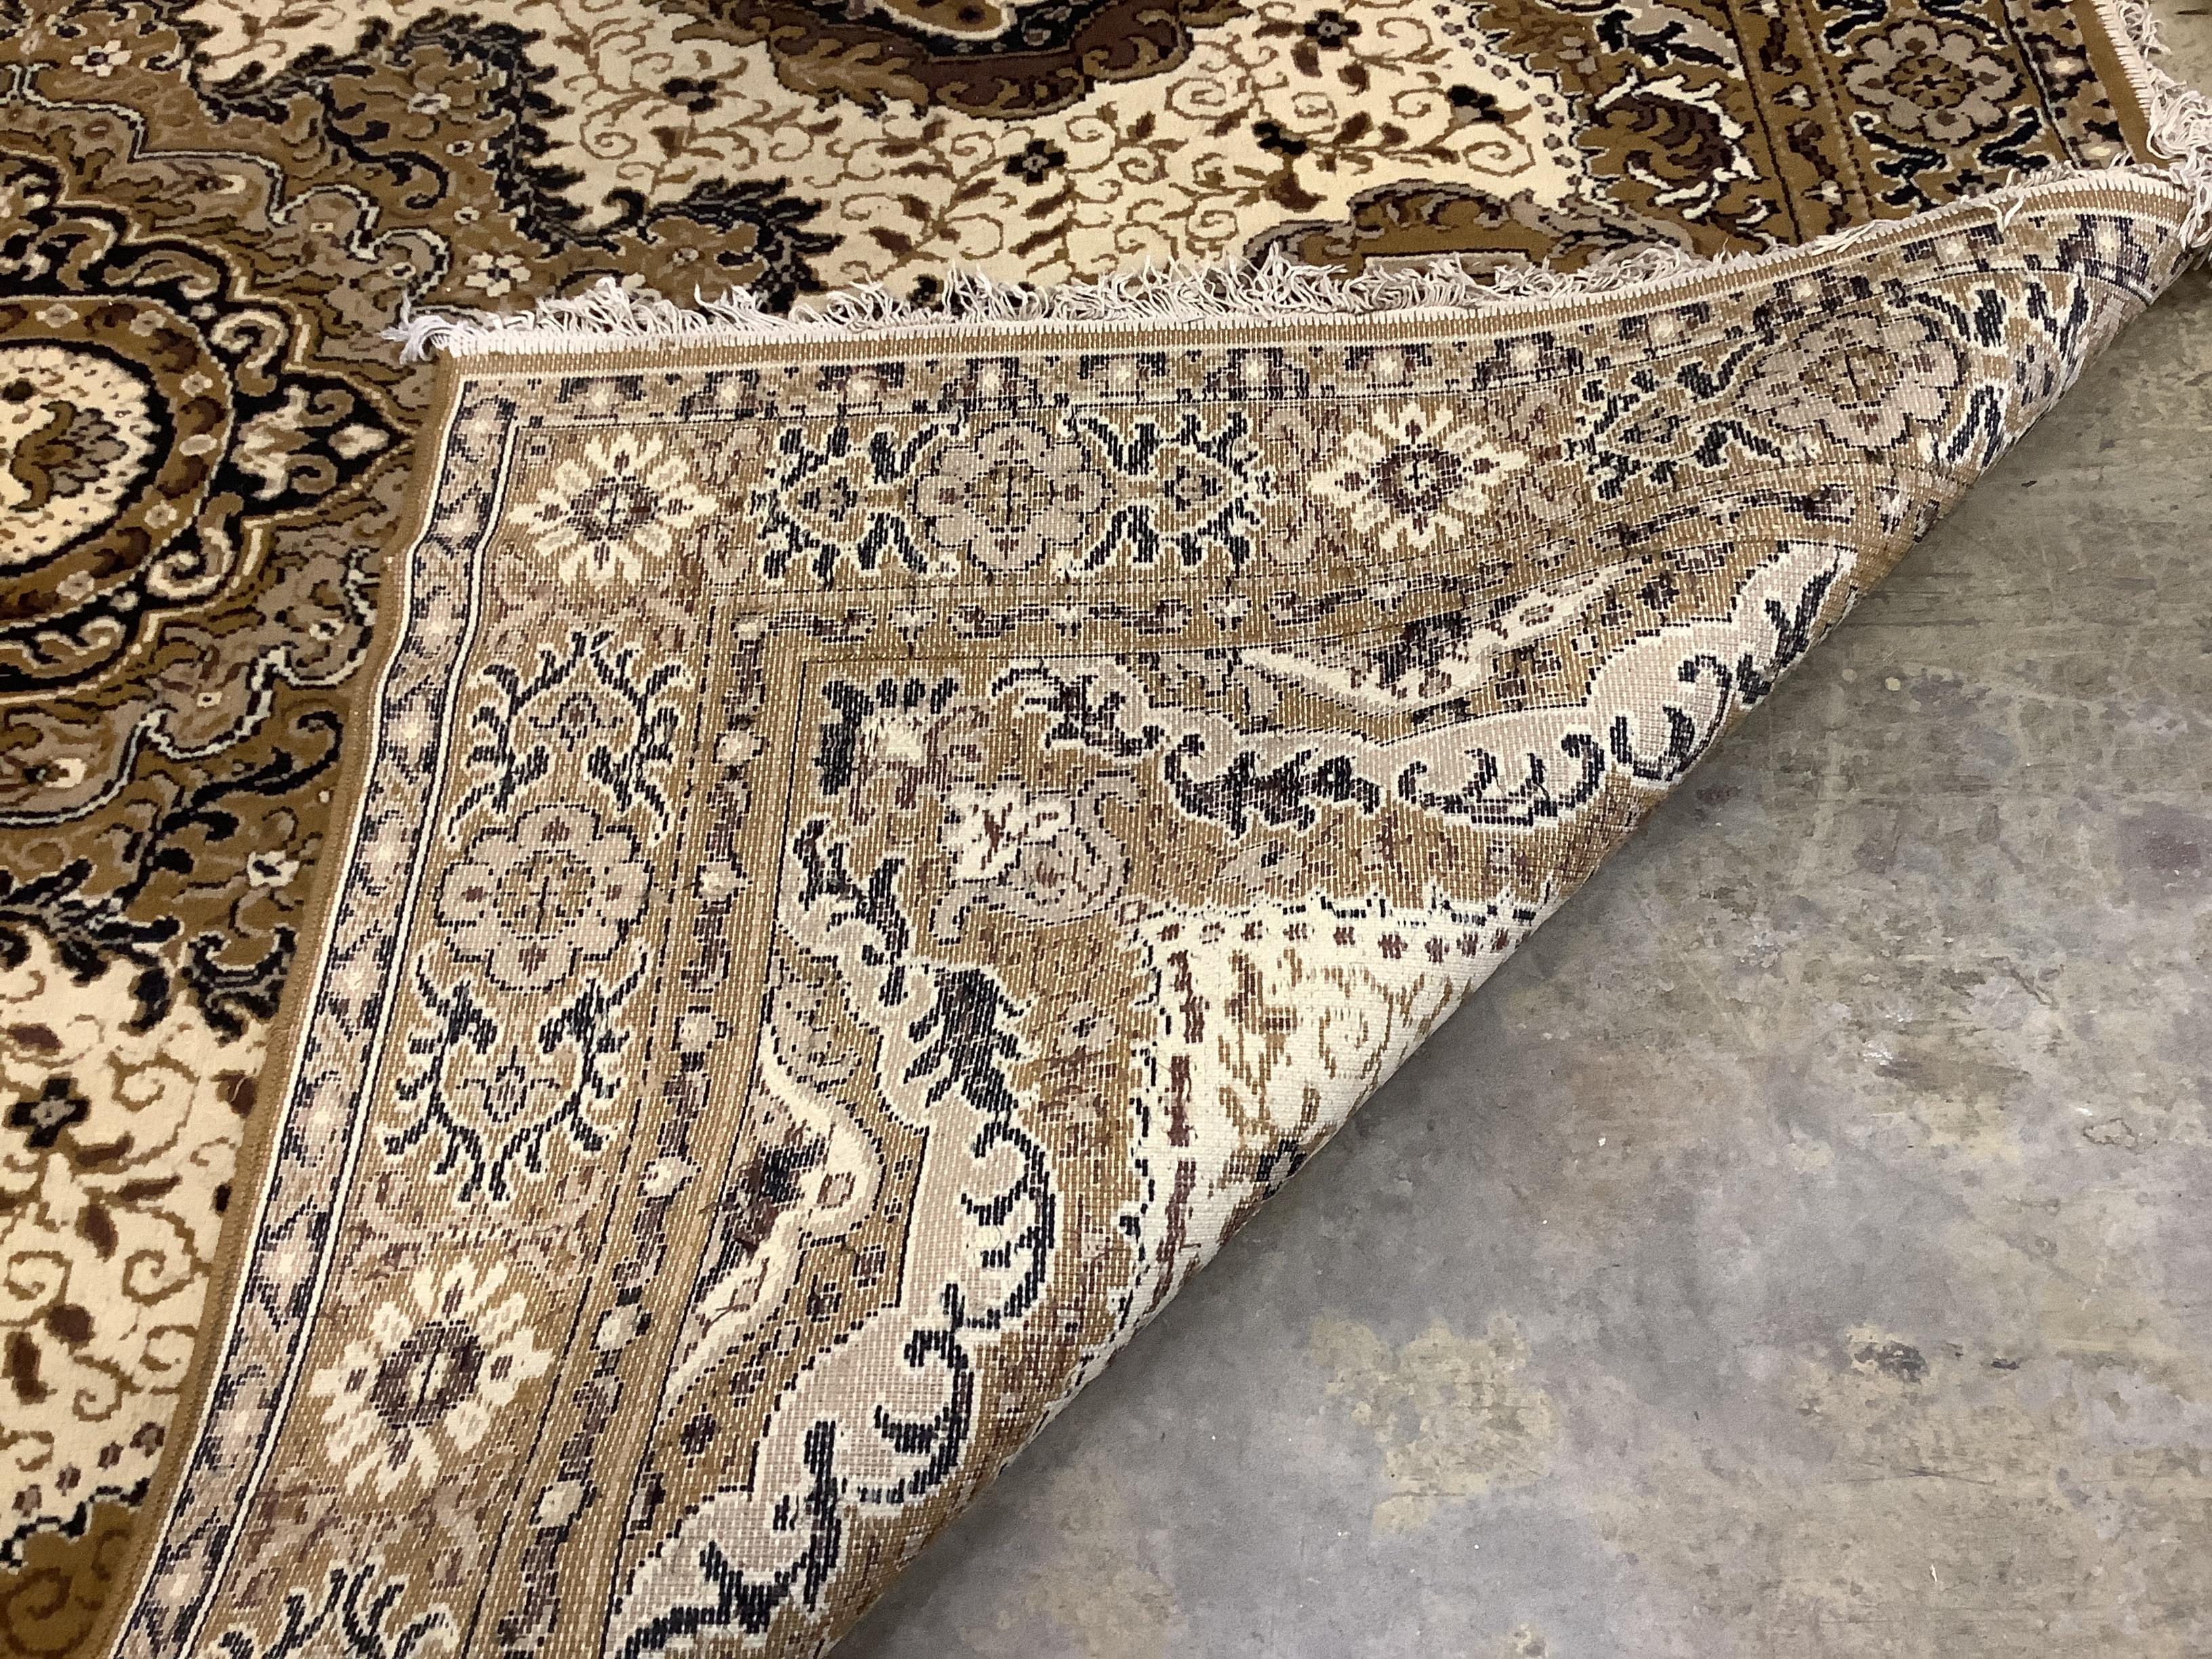 A machined Persian style ivory ground carpet, 330cm x 250cm